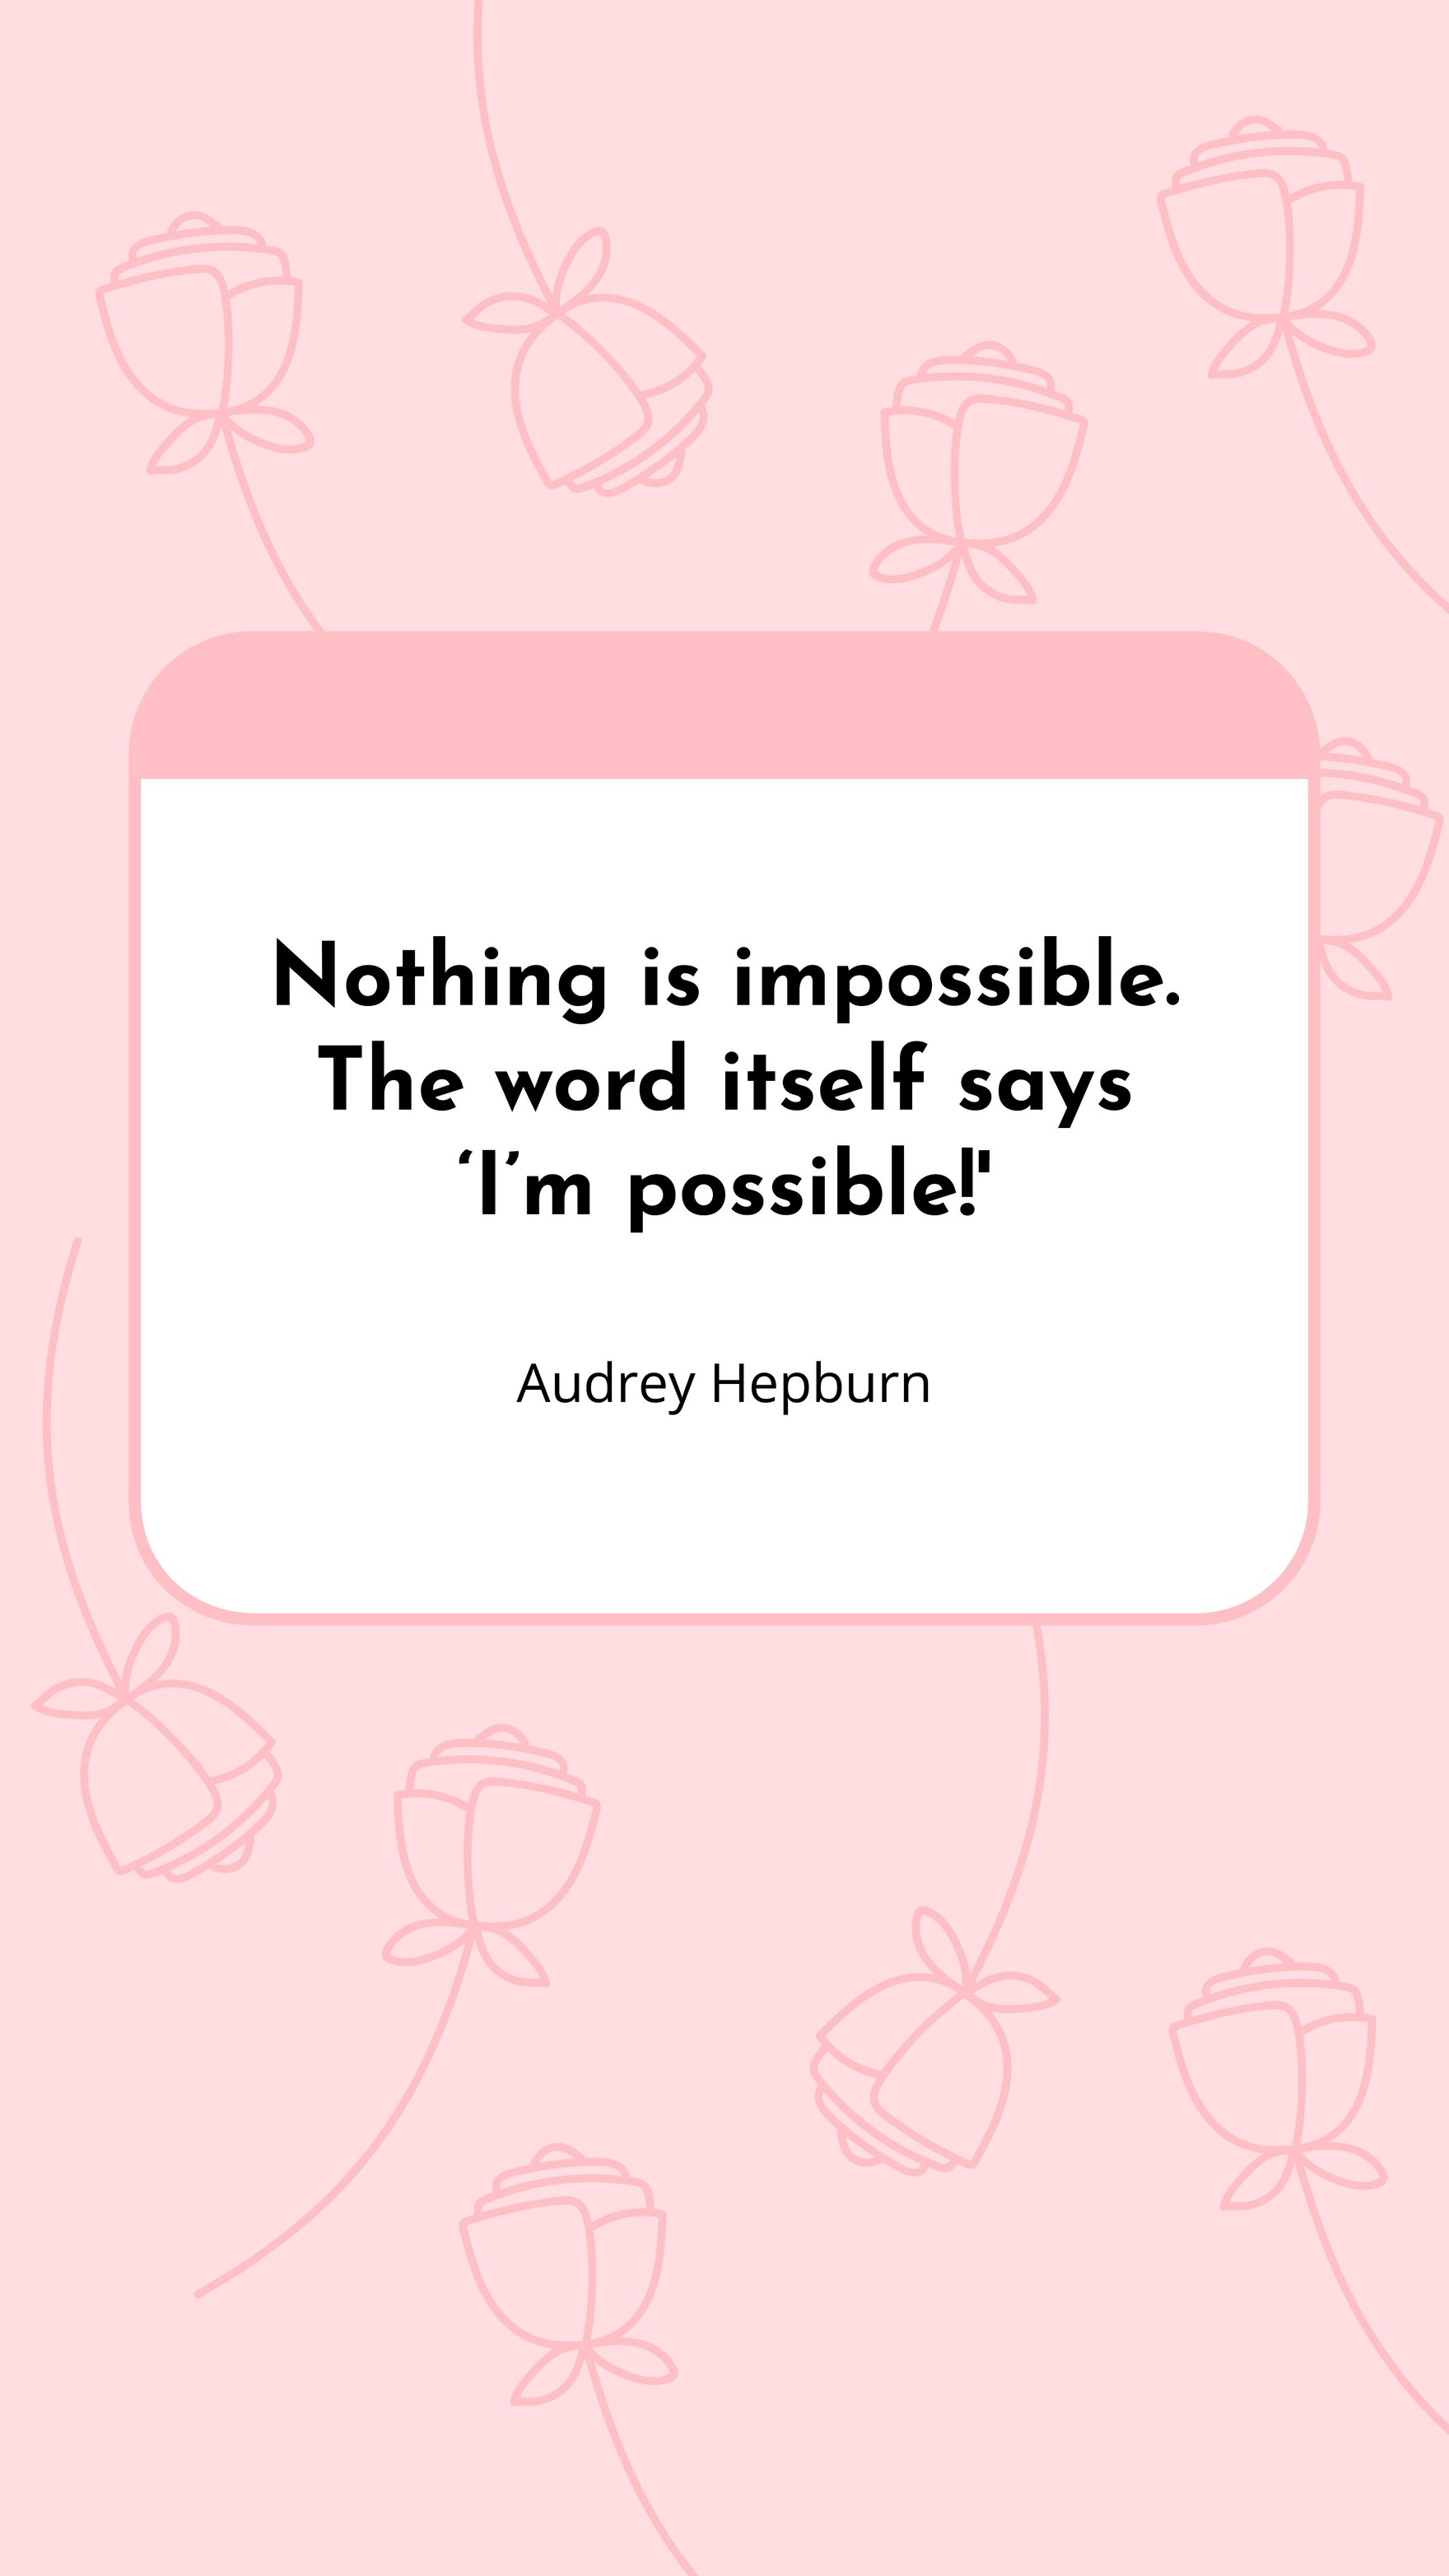 Audrey Hepburn - Nothing is impossible. The word itself says ‘I’m possible!'